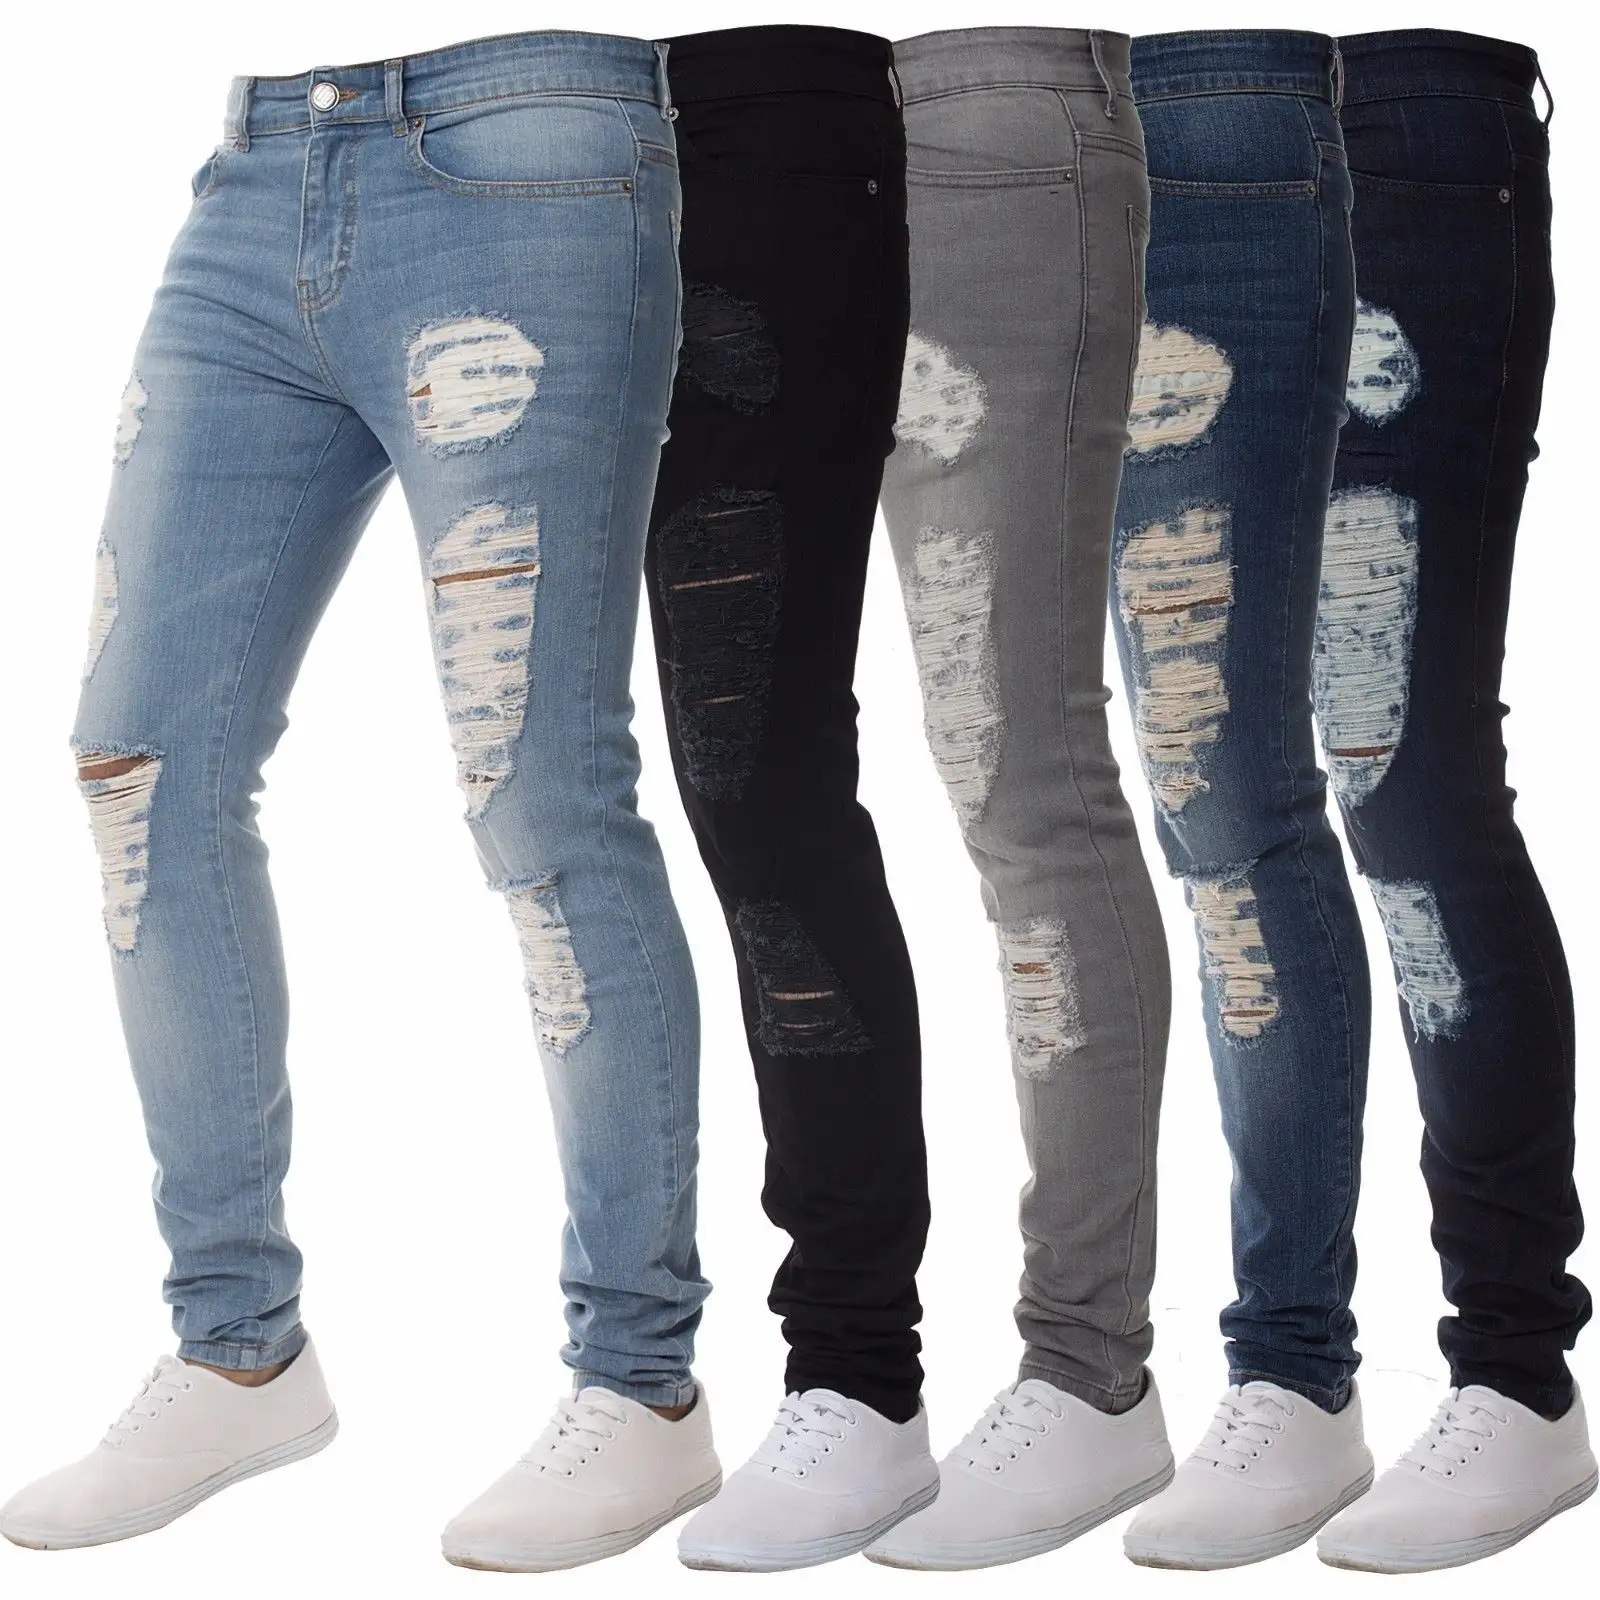 Ripped Stylish Denim Trousers Men's Biker Jeans Ripped Skinny Hiphop Comfortable Stretch Denim Pencil Cotton Jeans For Men